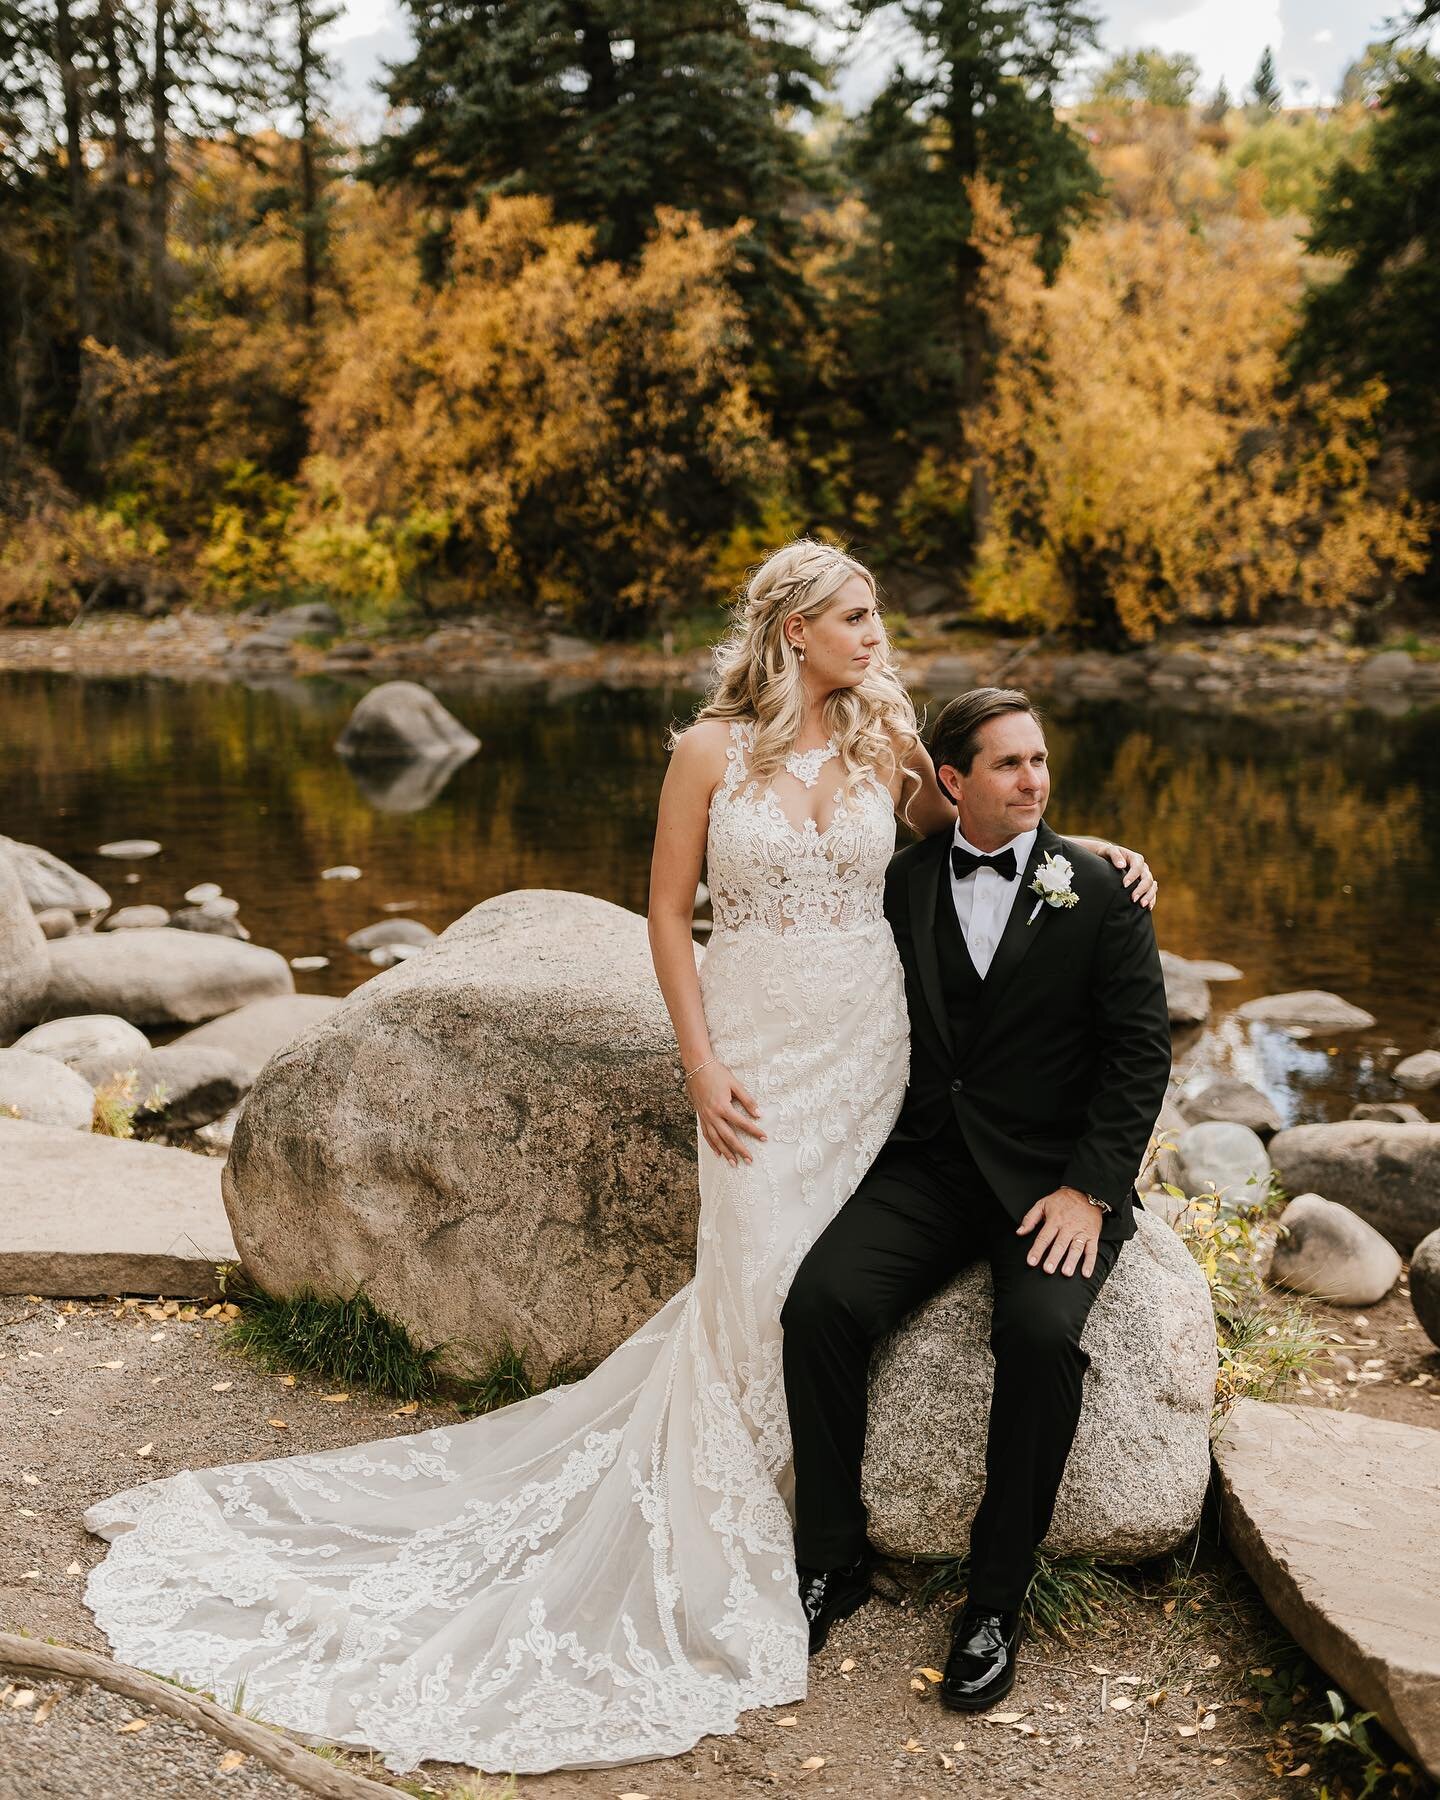 Fall, come baaaack! Mentally I&rsquo;m at the @westinriverfrontweddings on this majestic fall day. Don&rsquo;t get me wrong, I am so ready to be on my skis but like&hellip; can we just have one more moment?
.
.
.
.
Venue: @westinriverfrontweddings 
P